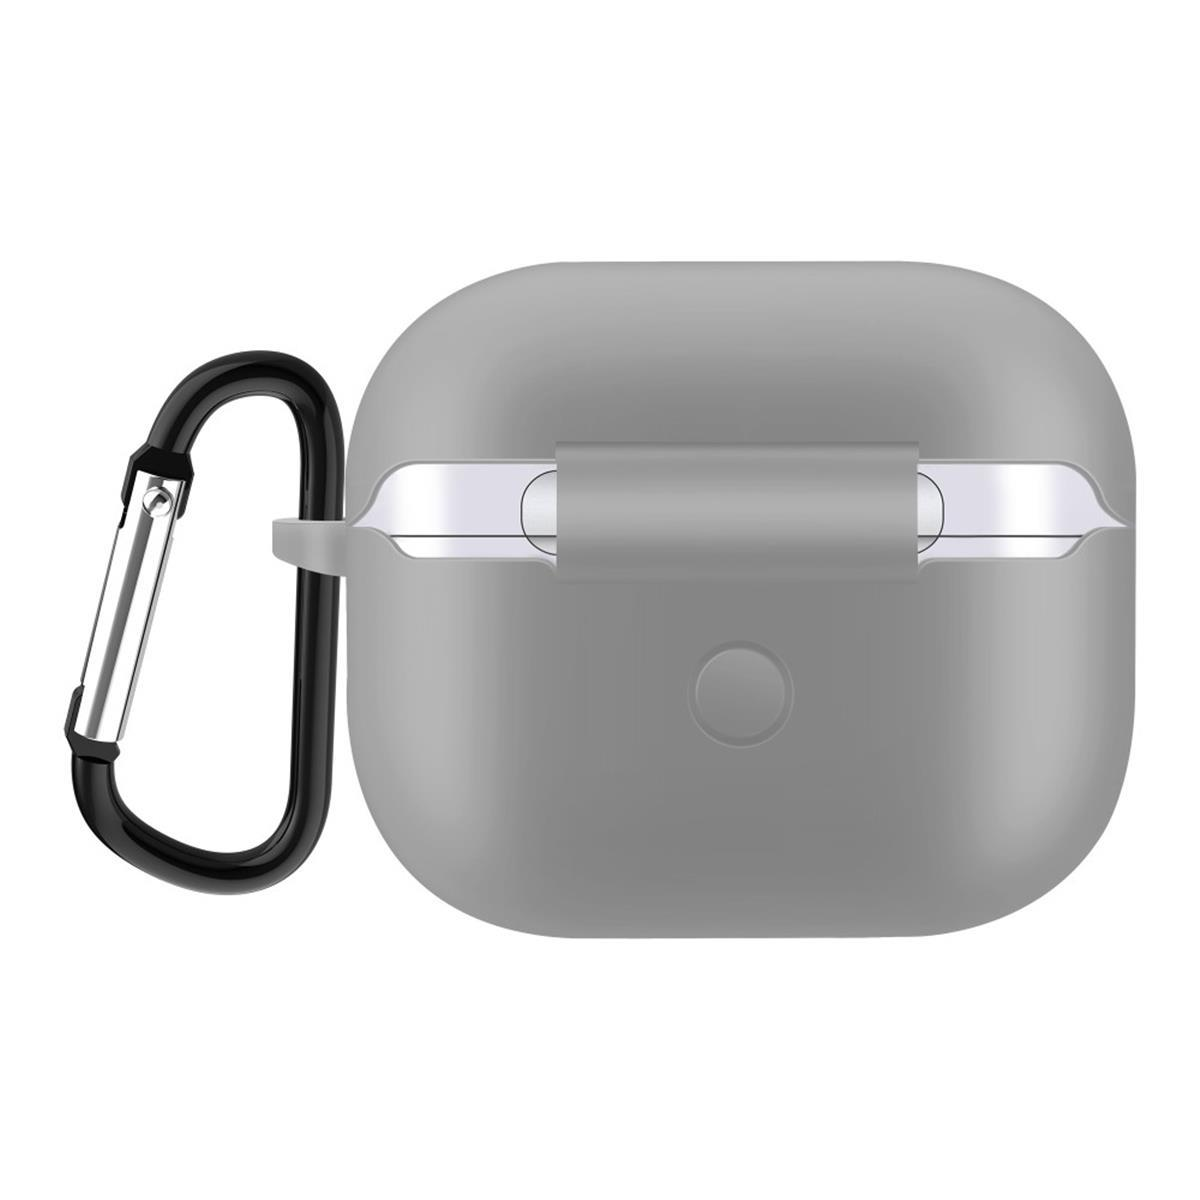 COVERKINGZ 76802 3 Silikoncover Apple AirPods Herren, Ladecase Grau, für